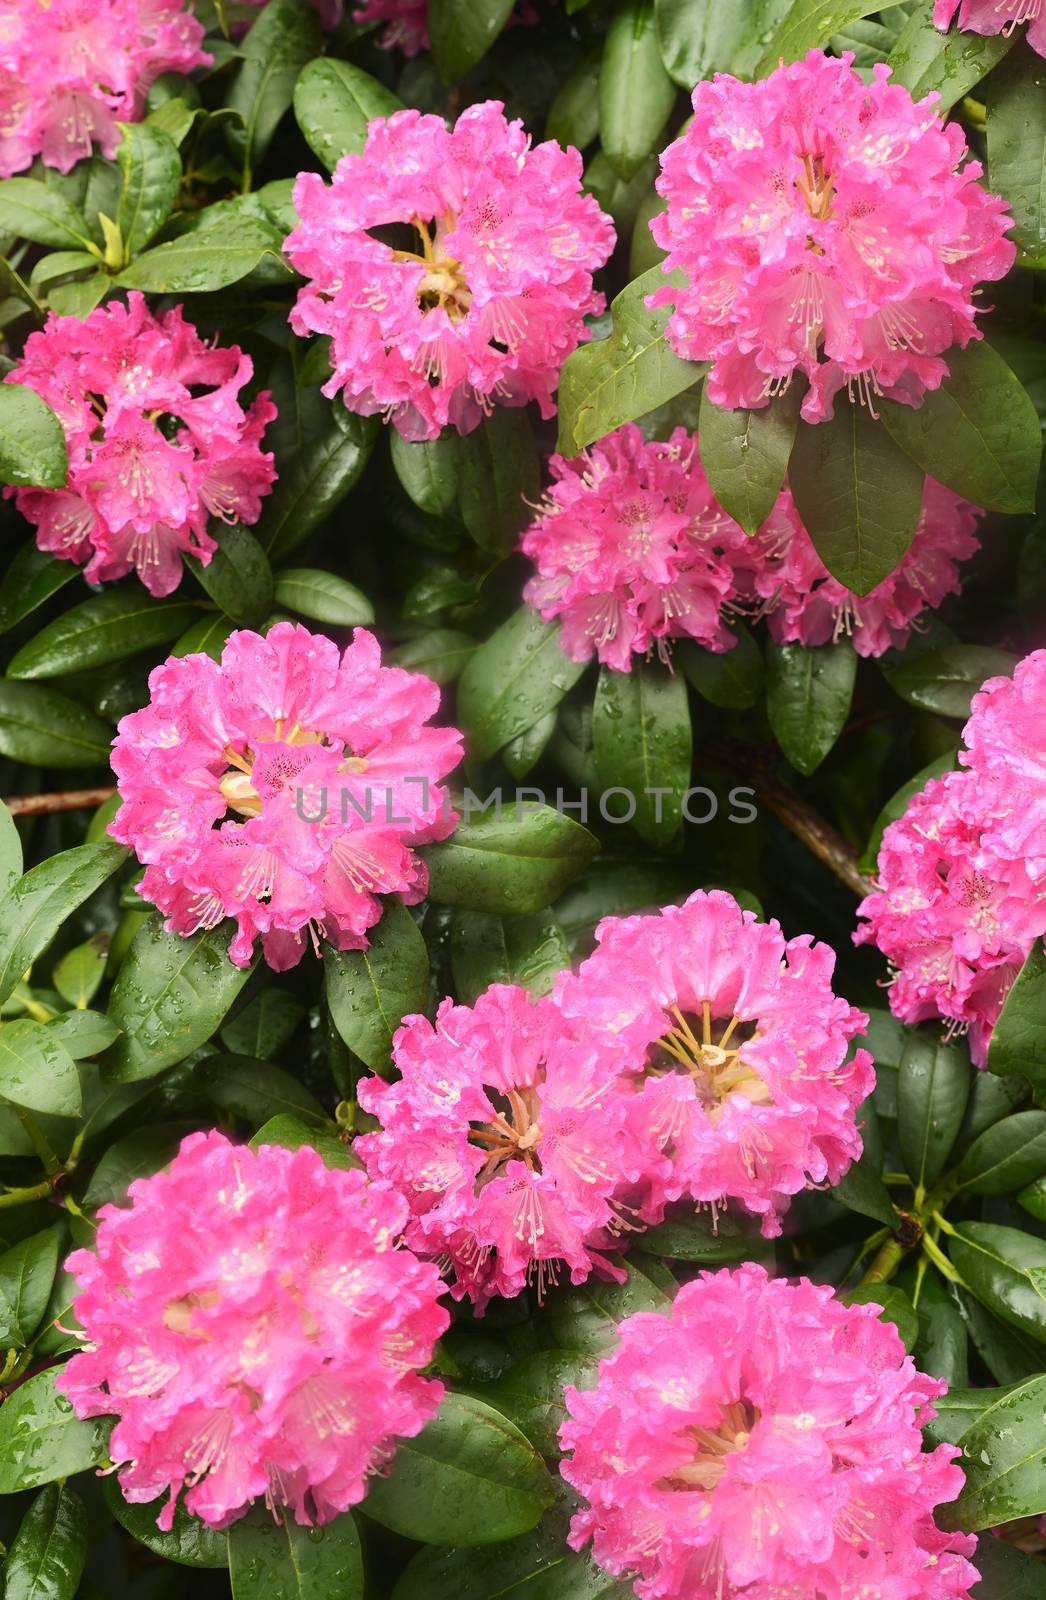 Closeup of Pink Rhododendron flower